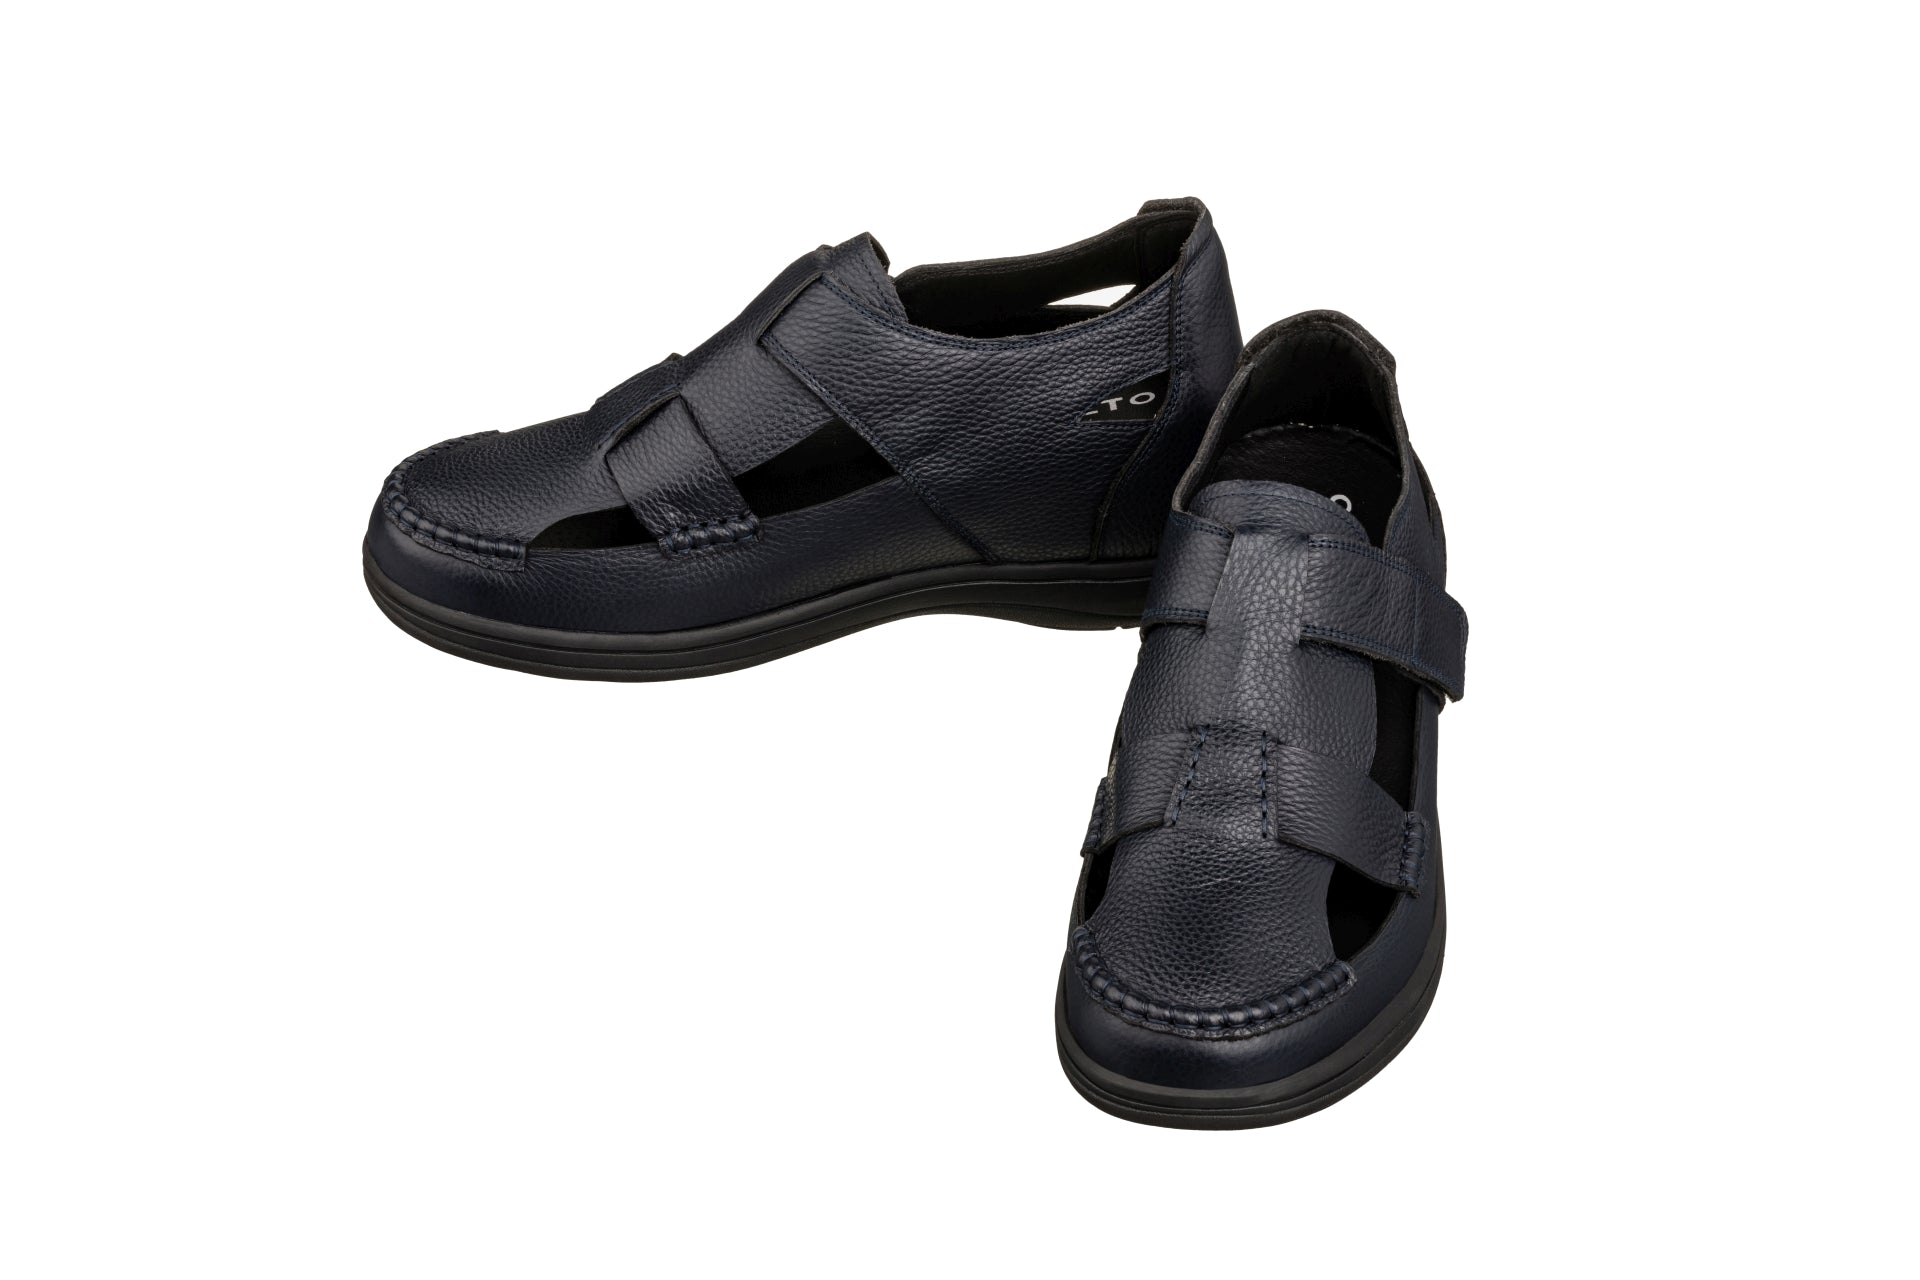 Elevator shoes height increase CALTO - K2663 - 3.2 Inches Taller (Navy Blue) - Casual Fisherman Sandal